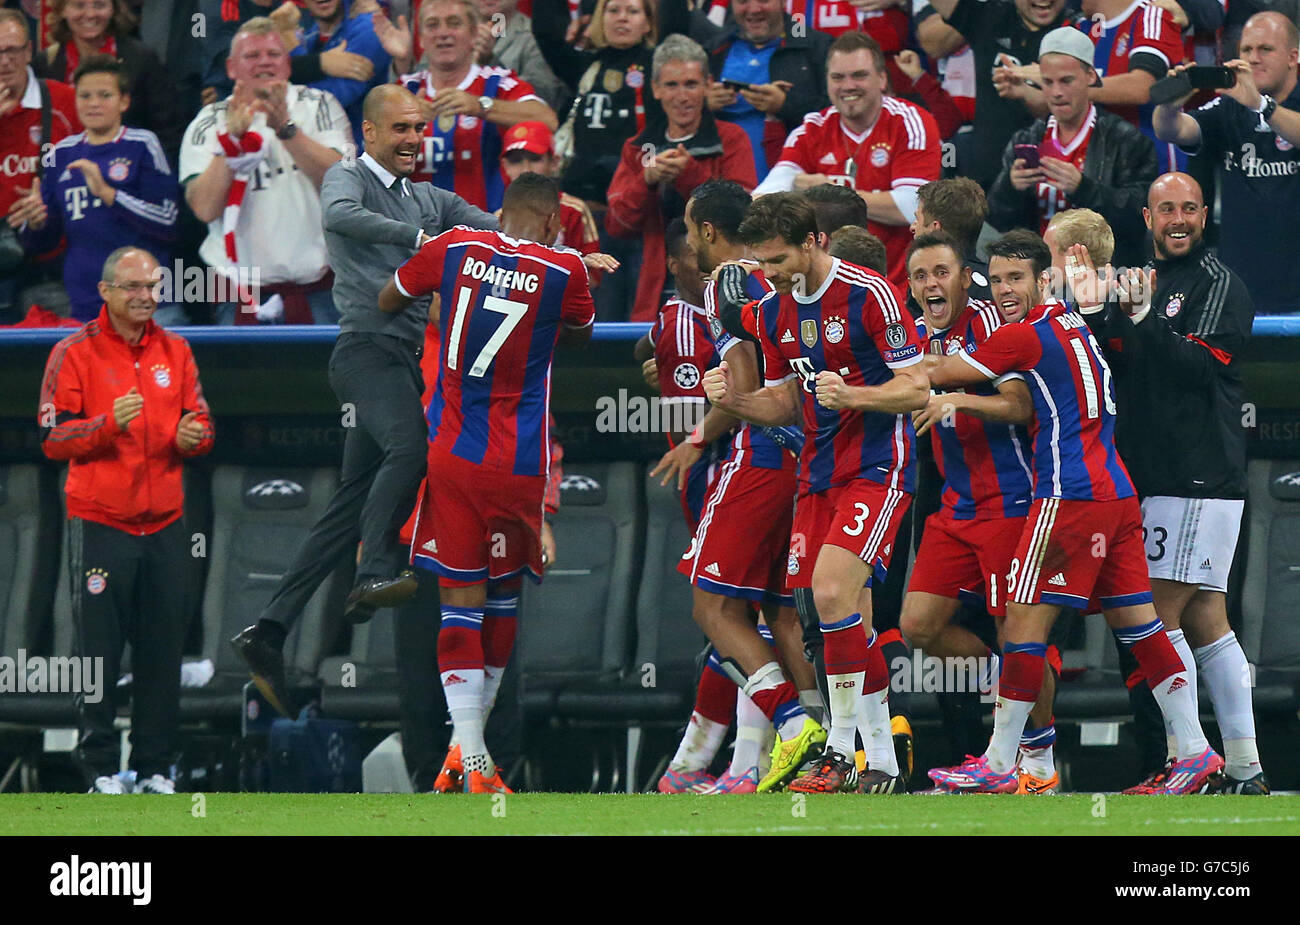 Bayern Munich's Jerome Boateng (17) celebrates with manager Pep Guardiola scoring his side's first goal Stock Photo